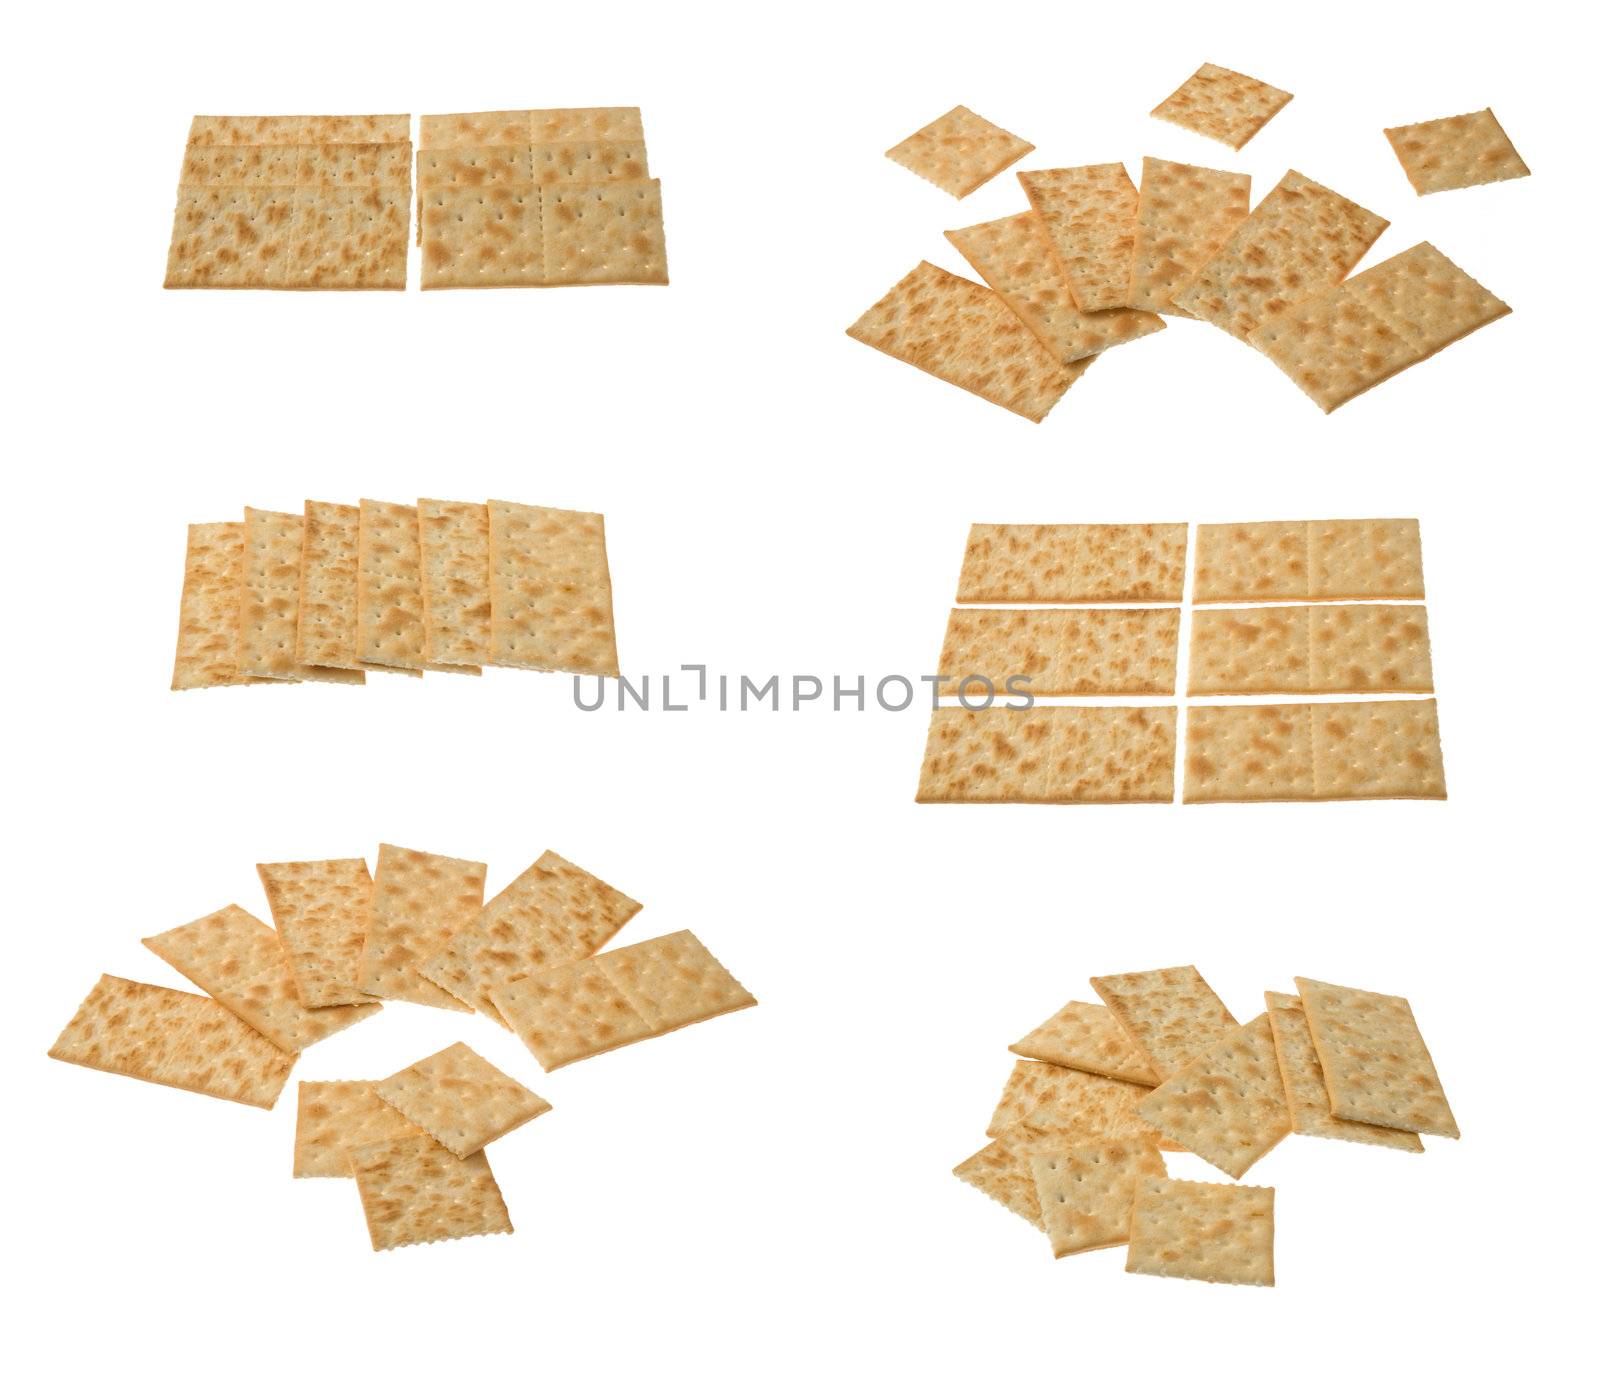 Six groups of crackers isolated over white background.